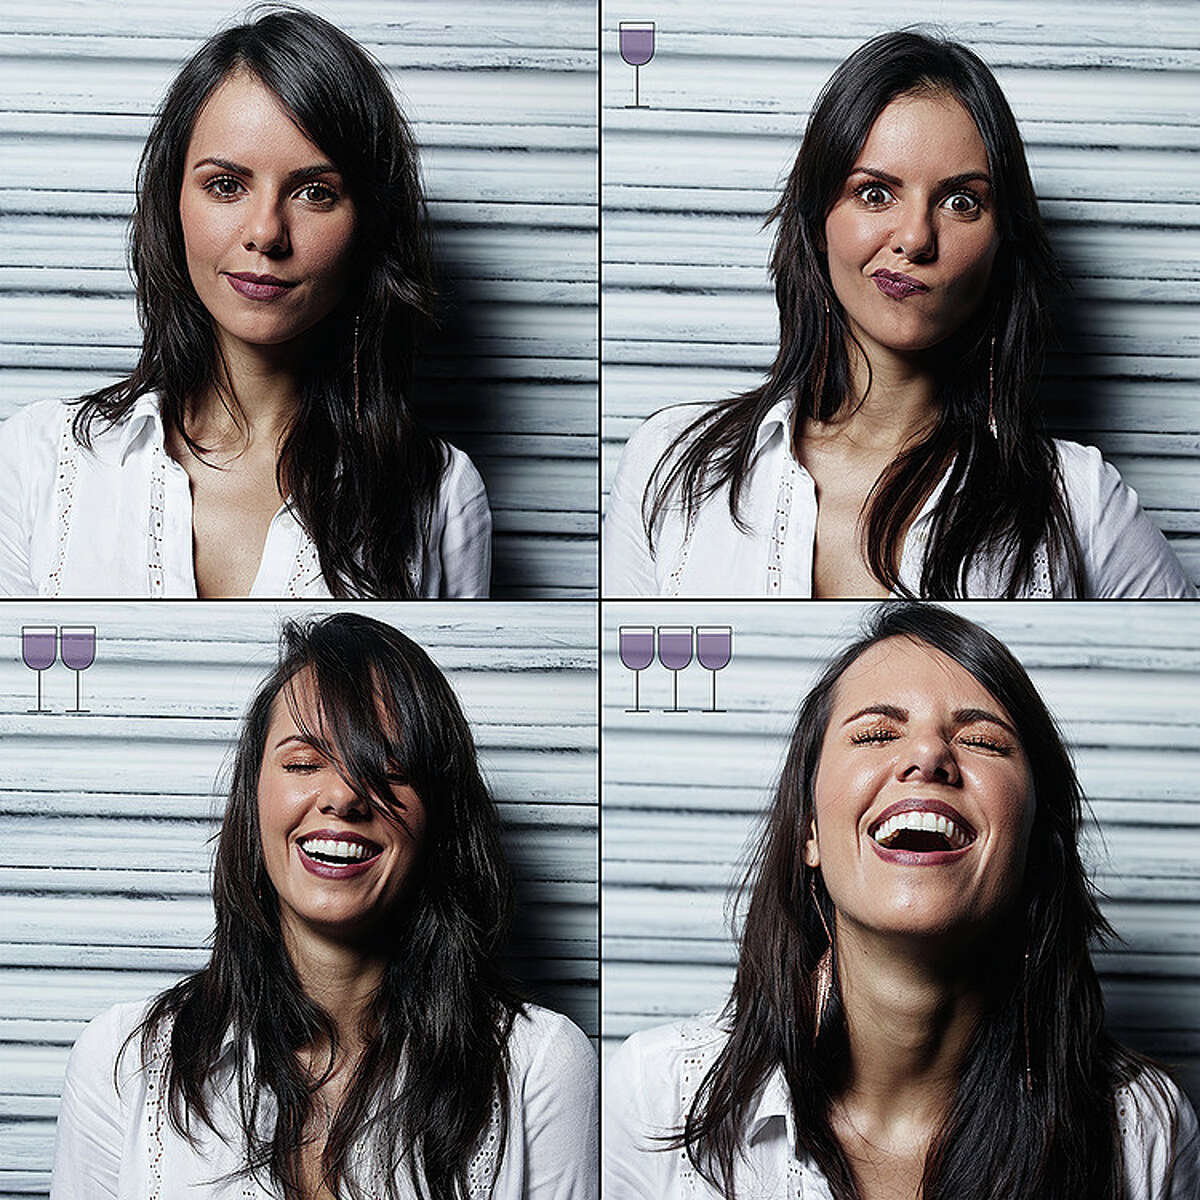 Brazilian photographer Marcos Alberti captured these images to show how people's appearances change as they drink wine.